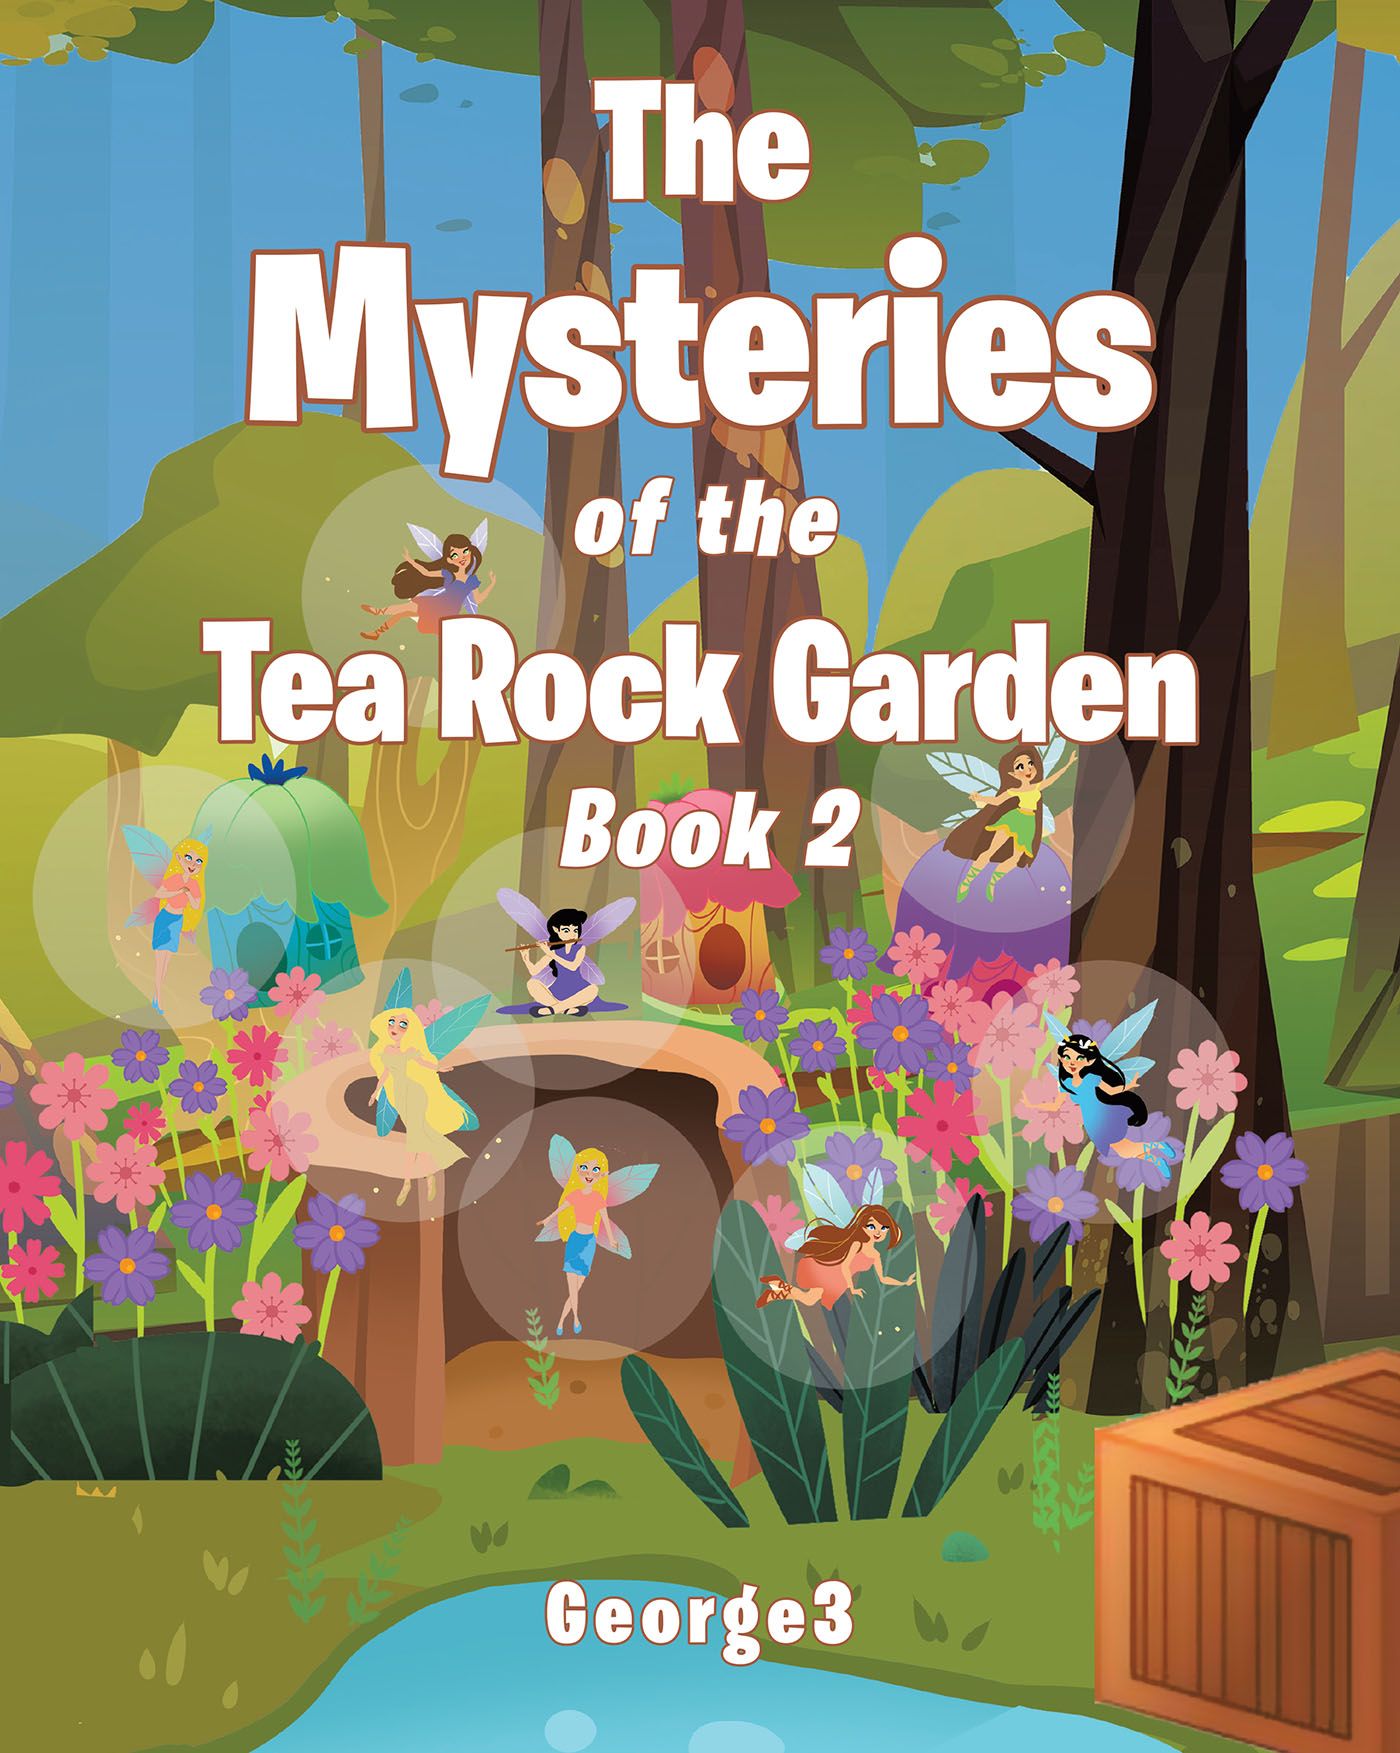 George3’s Newly Released "The Mysteries of the Tea Rock Garden Book Two" is a Creative Children’s Tale That Brings Engaging Lessons of Faith in a Creative Format